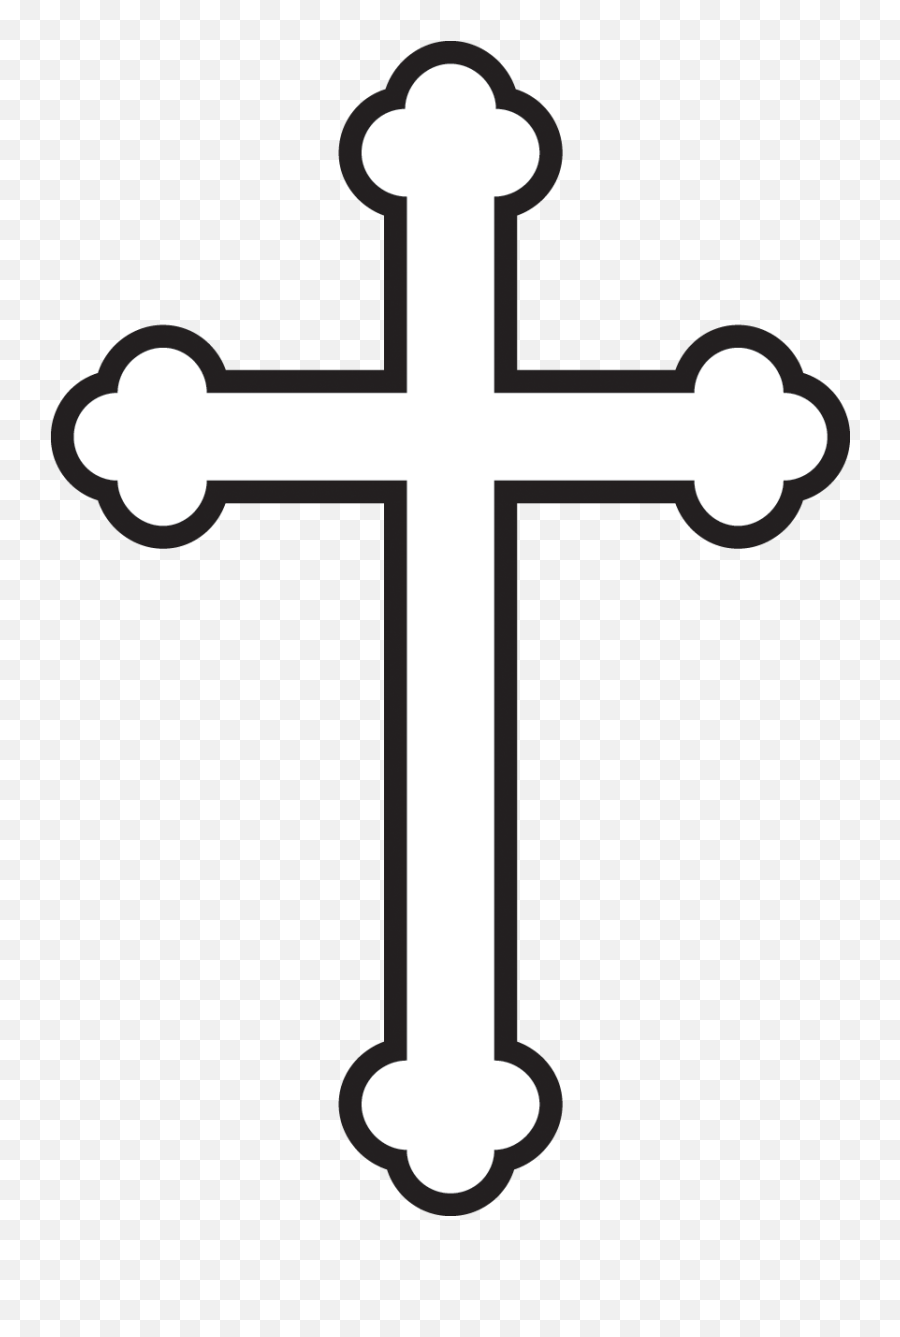 Crosses Images Clipart - Praying Hands With Cross Drawings Christian Cross Emoji,Prayer Hands Clipart